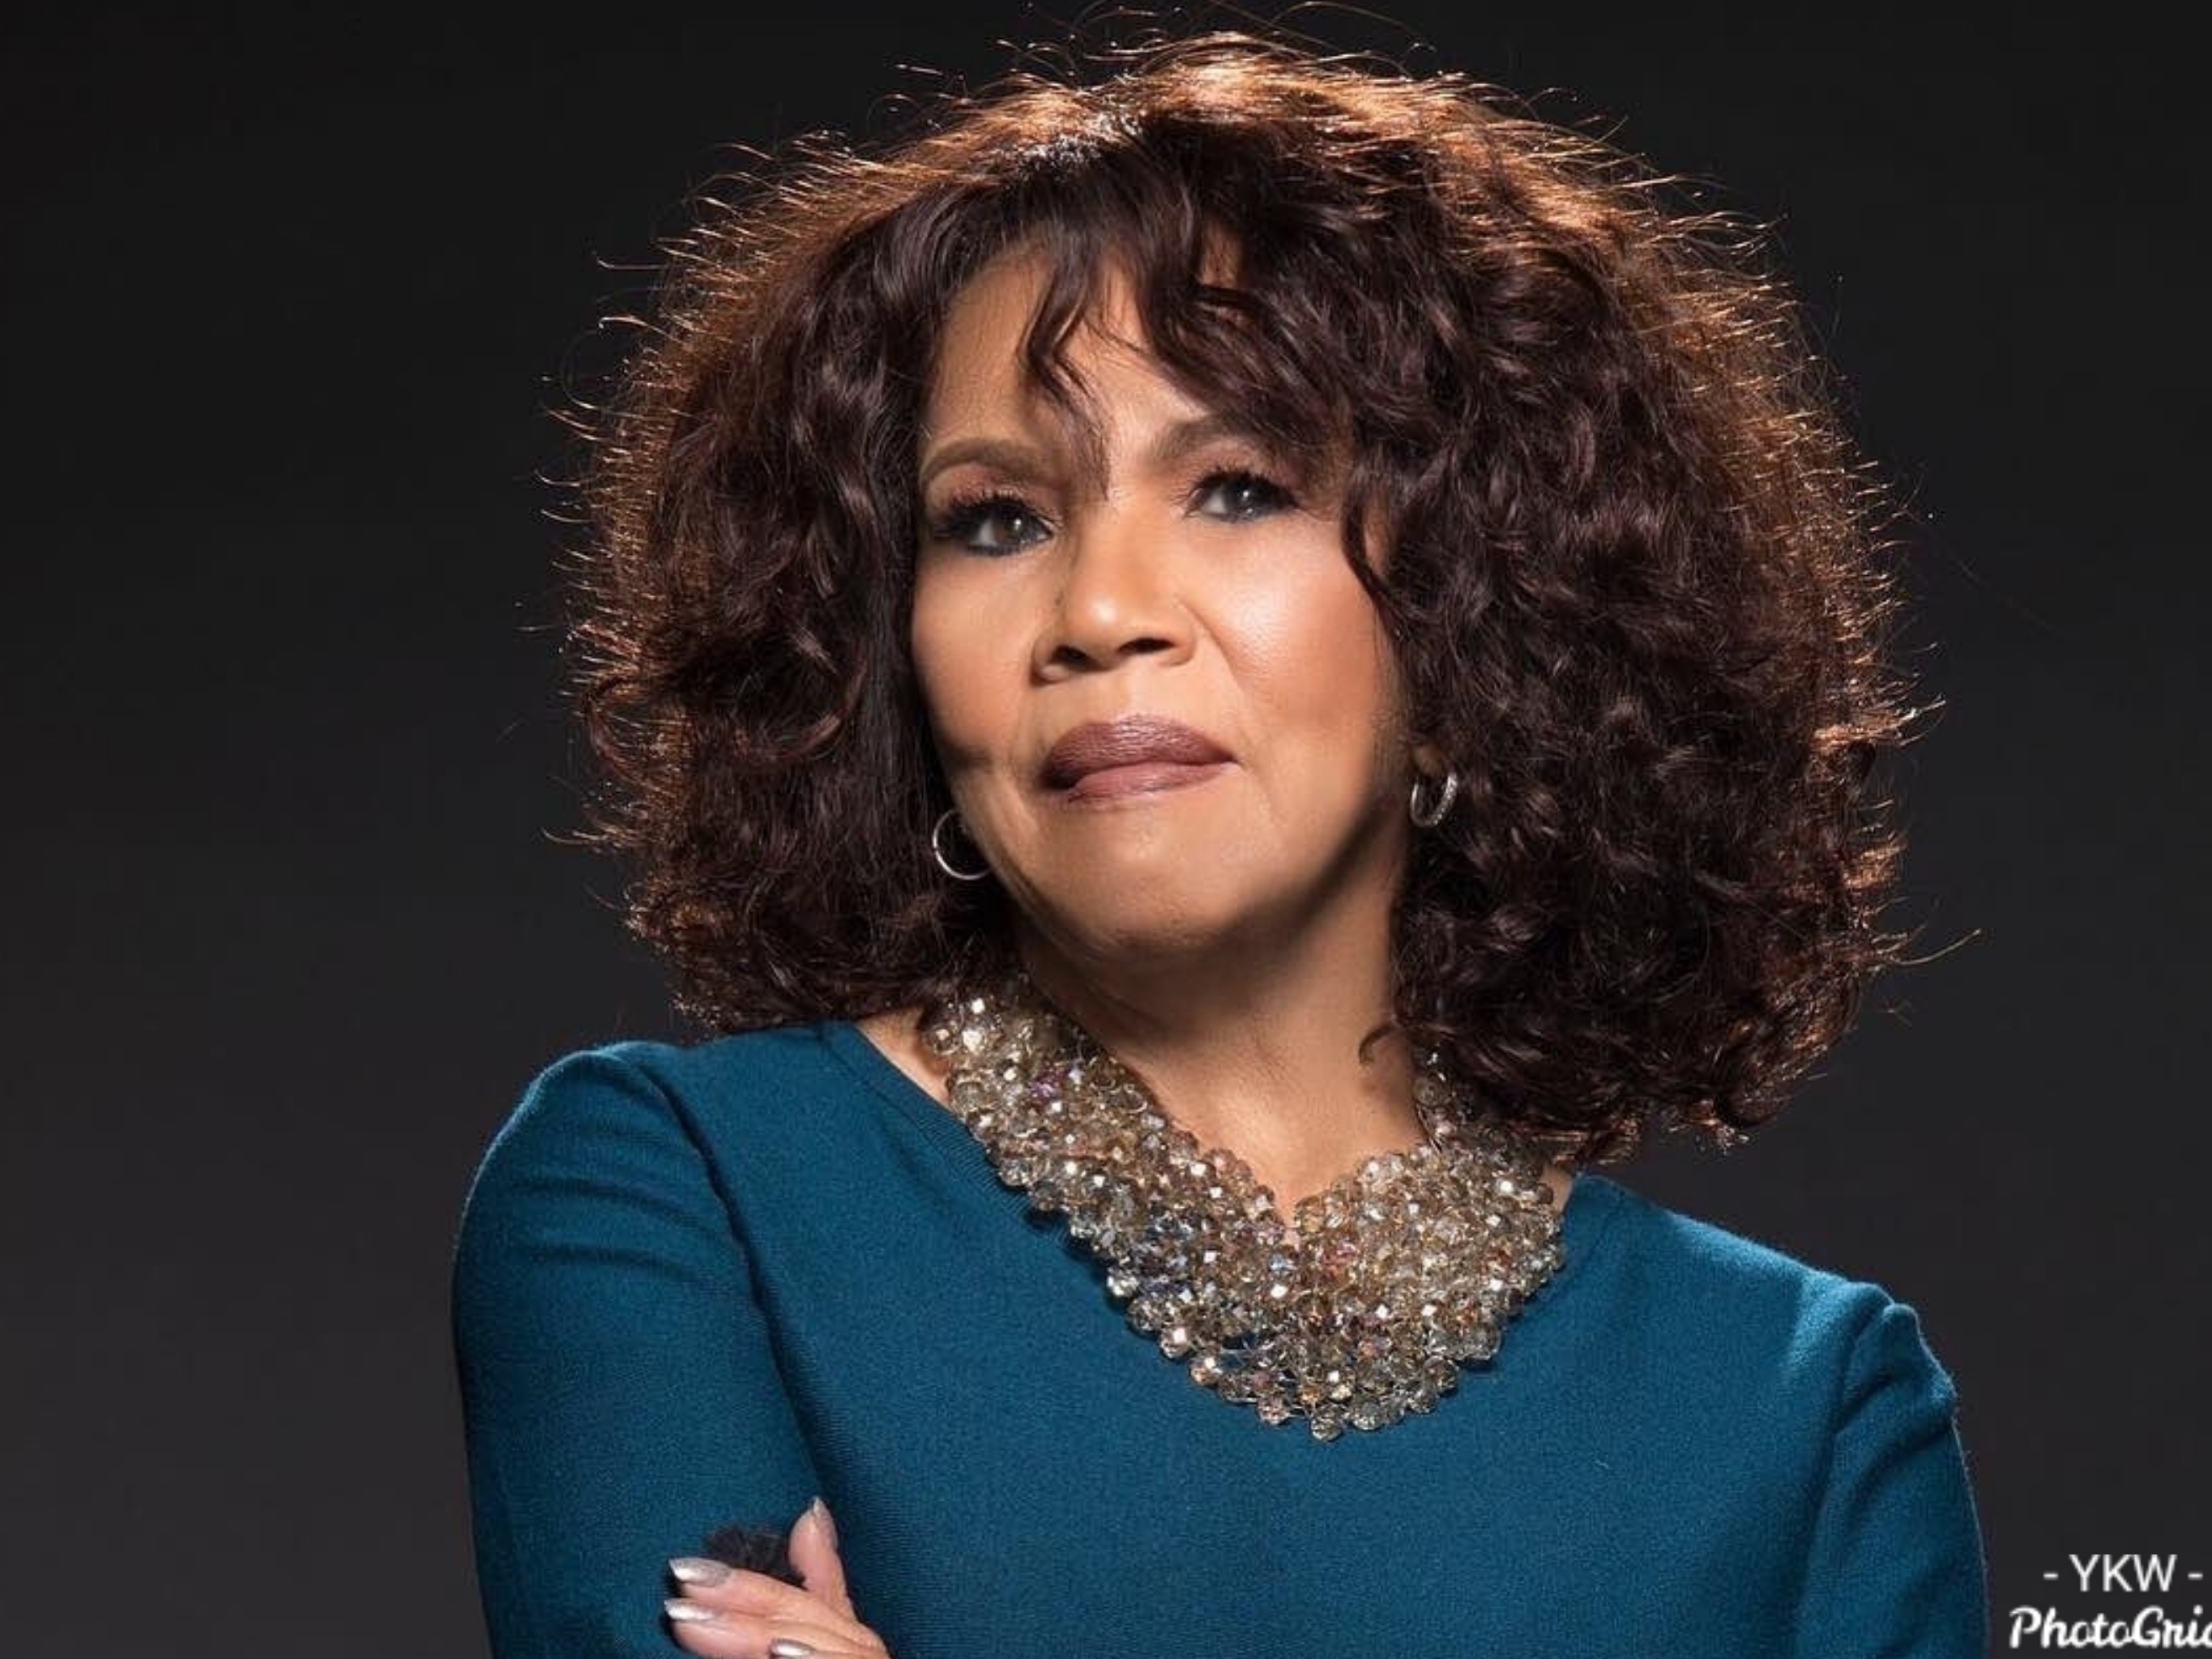 Candi Staton Is Grateful To Be Celebrating Her 80th Birthday Cancer-Free!